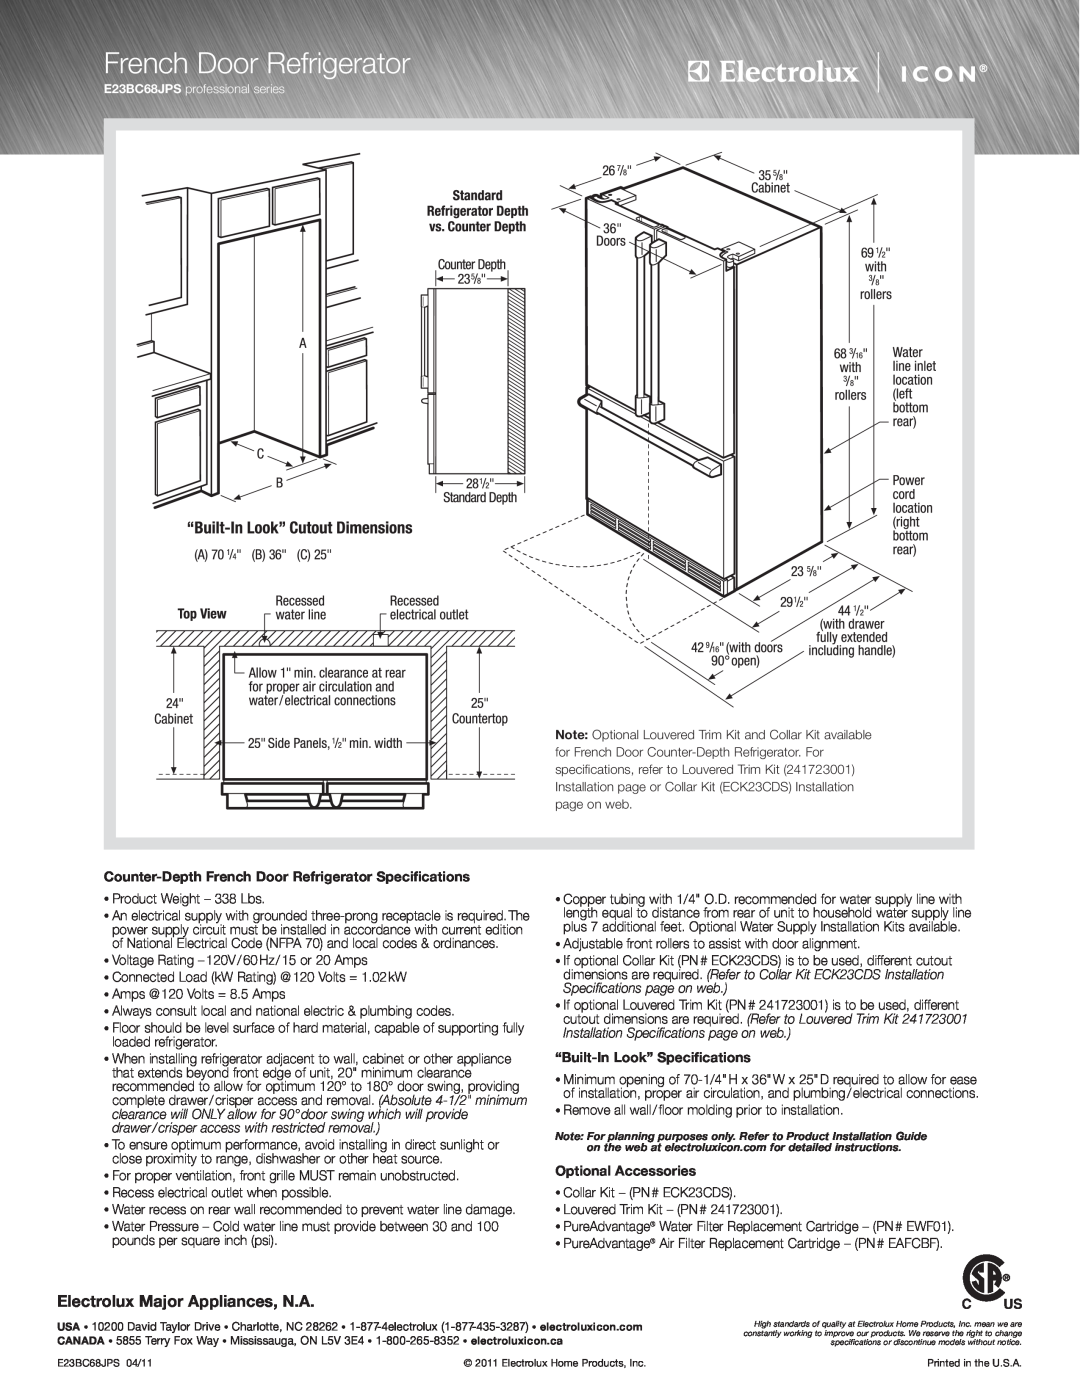 Electrolux E23BC68JPS Electrolux Major Appliances, N.A, French Door Refrigerator, “Built-In Look” Specifications 